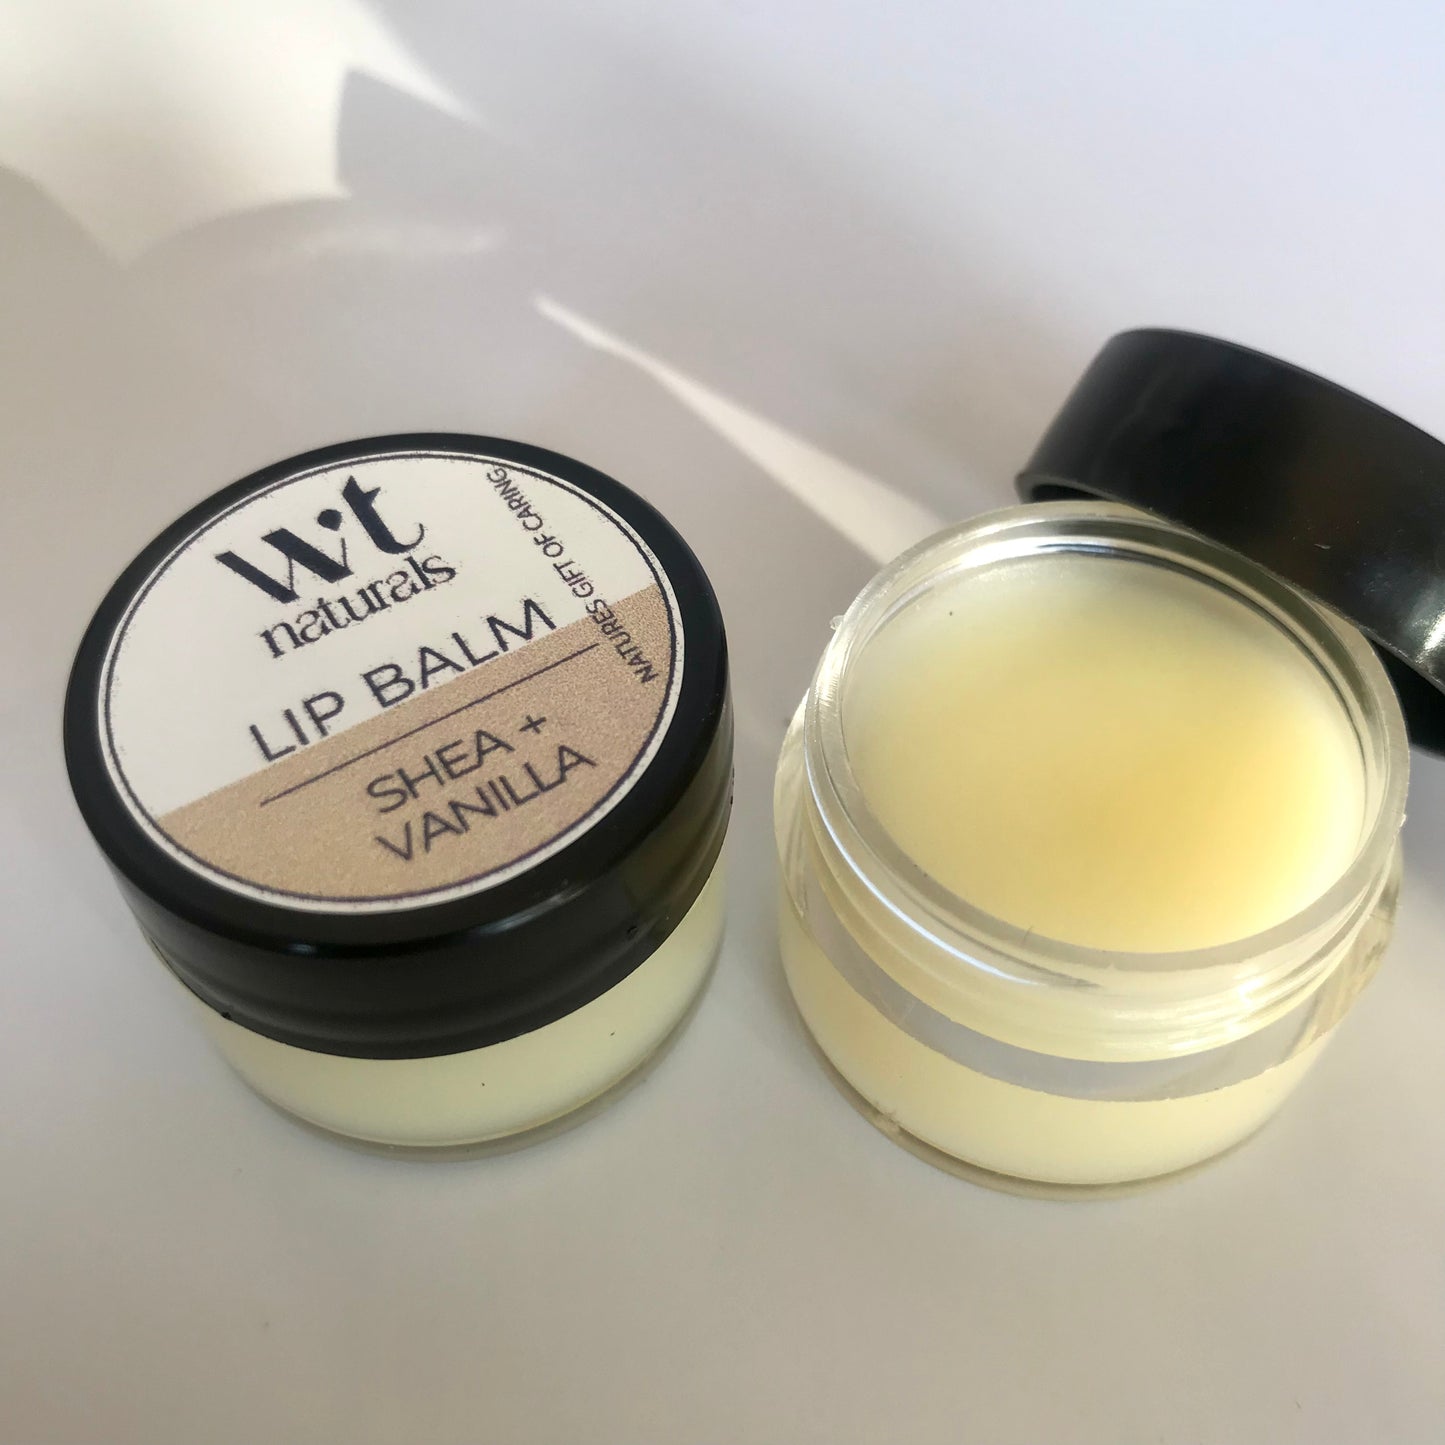 LIP BALMS - Made from Beeswax